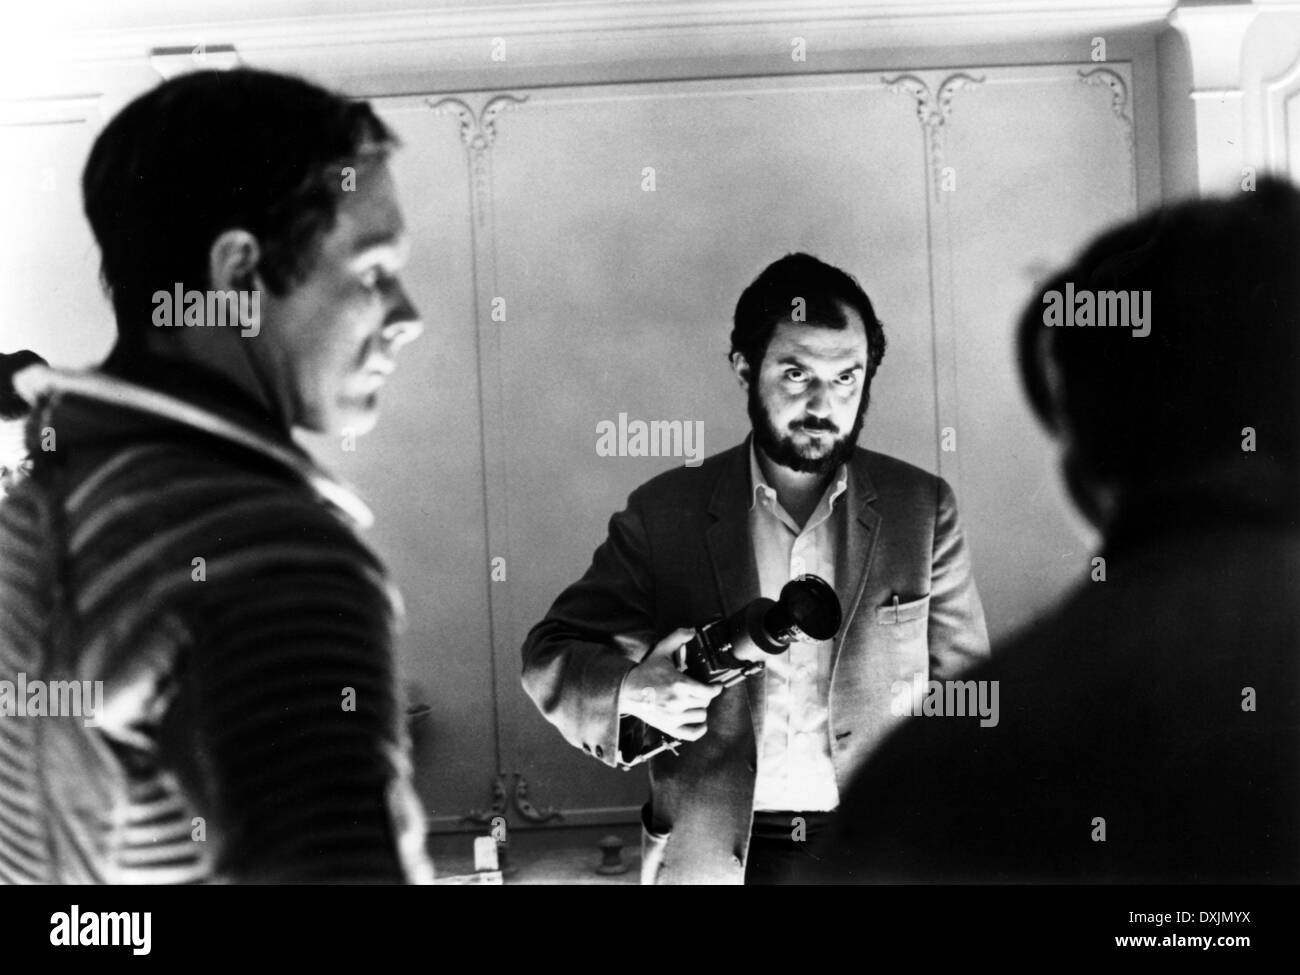 2001 A SPACE ODYSSEY (US/UK 1968) STANLEY KUBRICK (director, Stock Photo